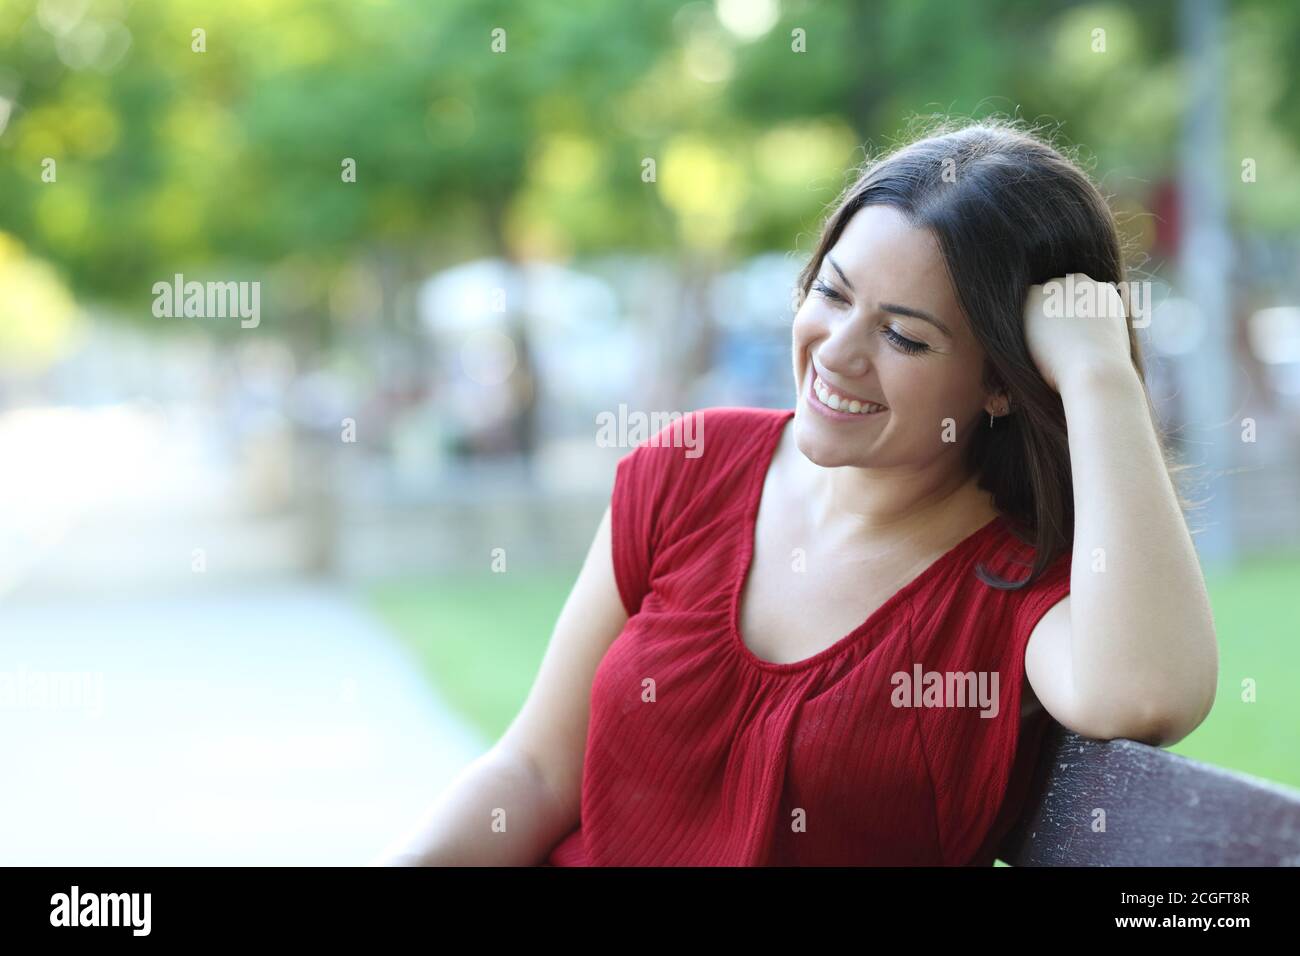 Happy woman relaxing contemplating sitting on a bench in a park Stock Photo